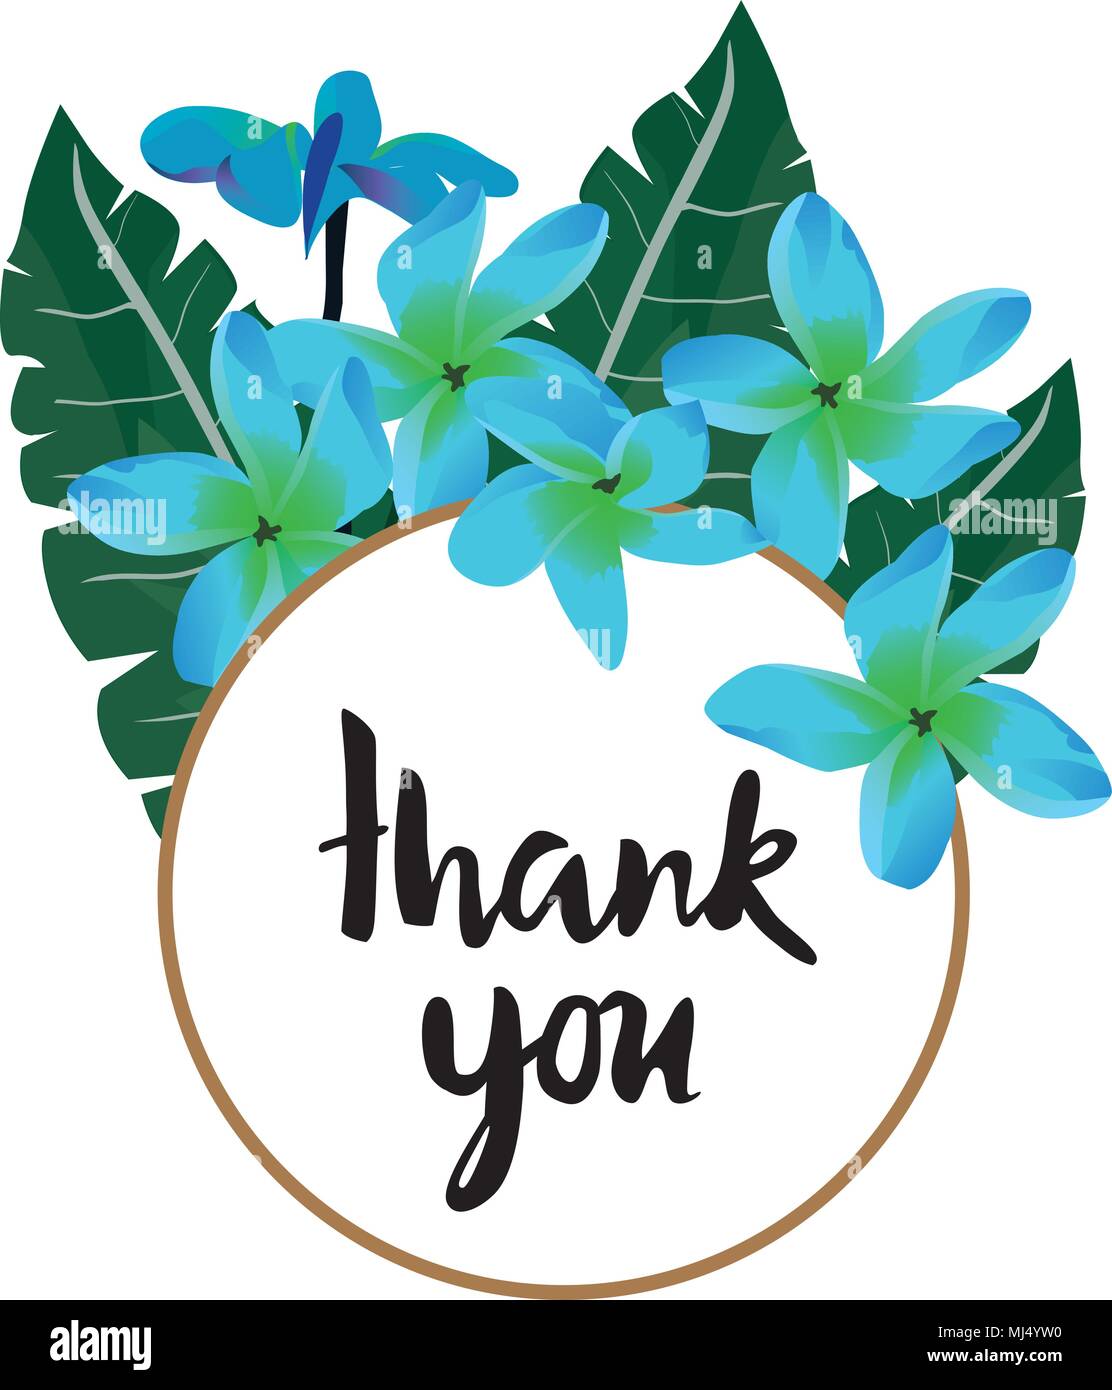 vector illustration of thank you card with tropical flowers Stock ...